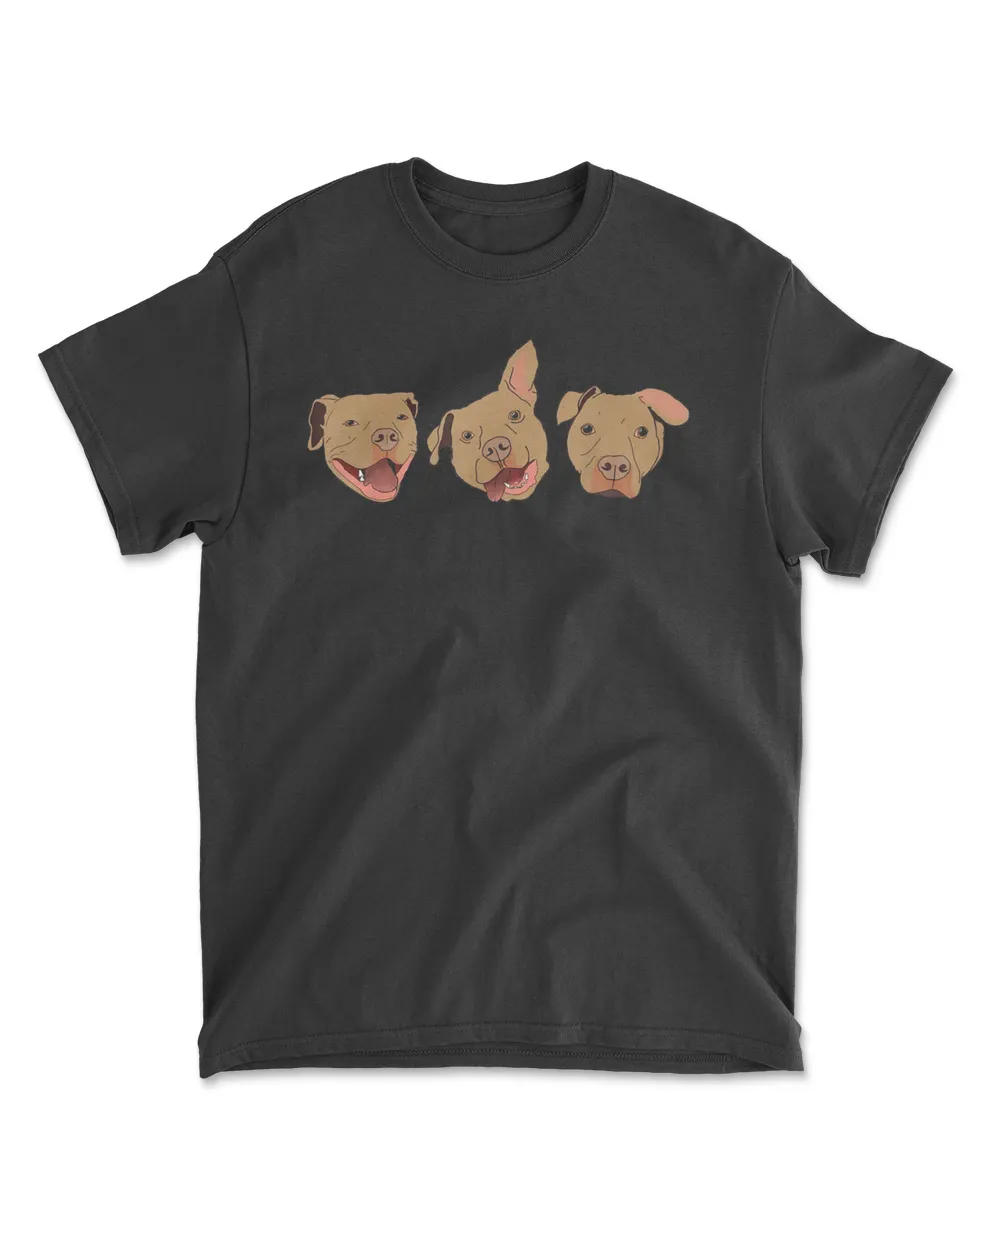 The Three Faces of a Pitbull T-Shirt